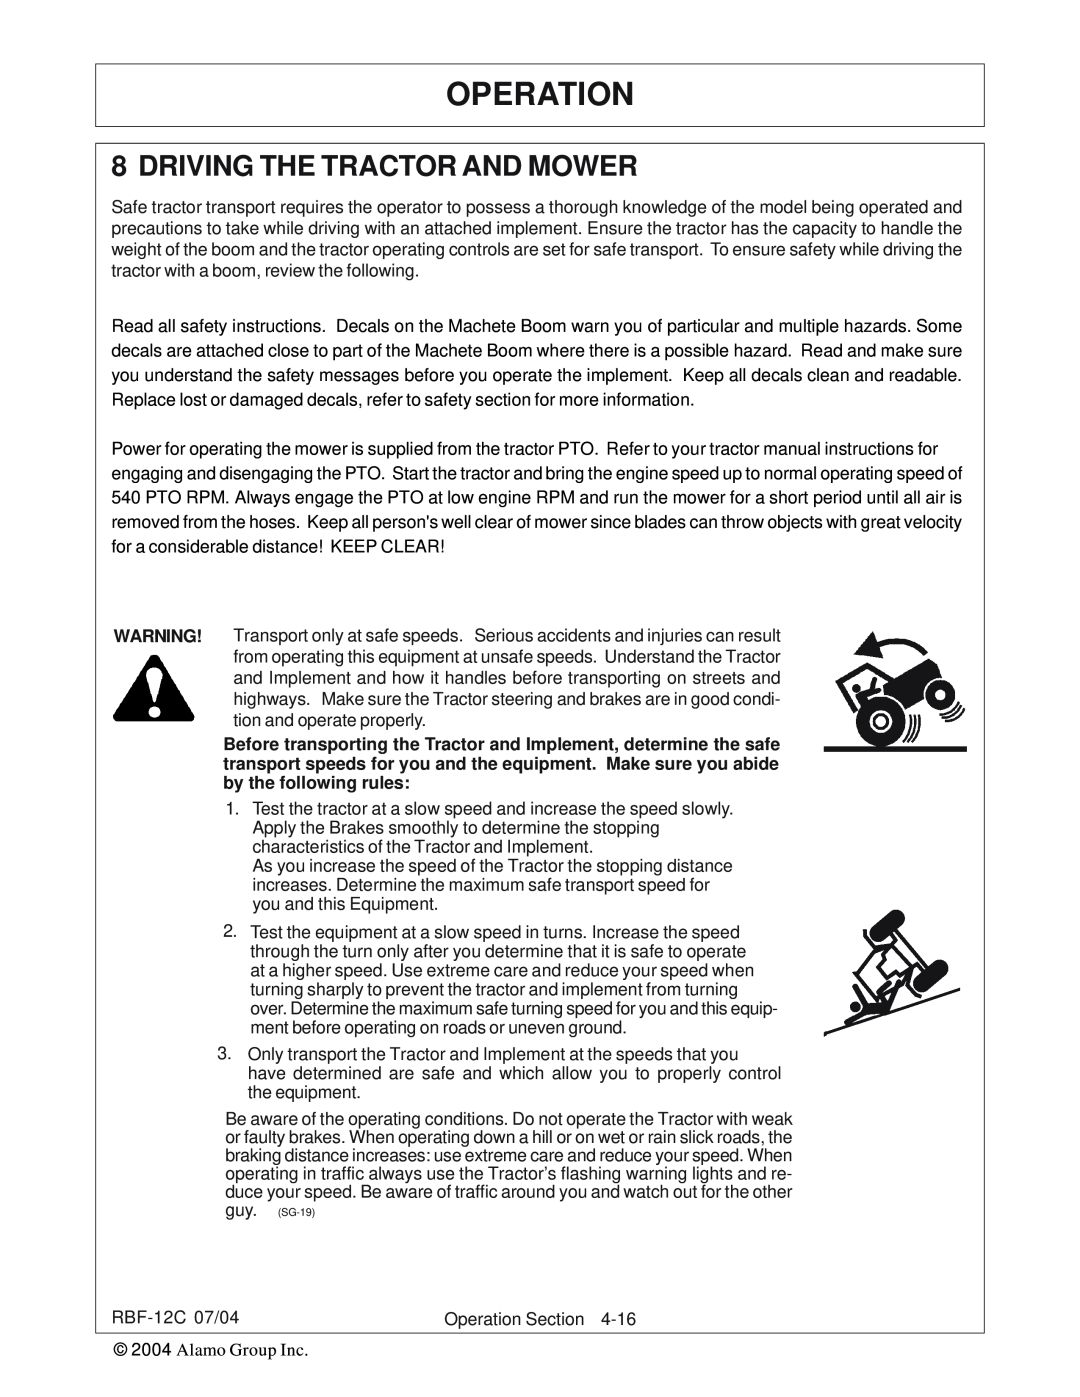 Tiger Products Co., Ltd RBF-12C manual Driving The Tractor And Mower, Operation 